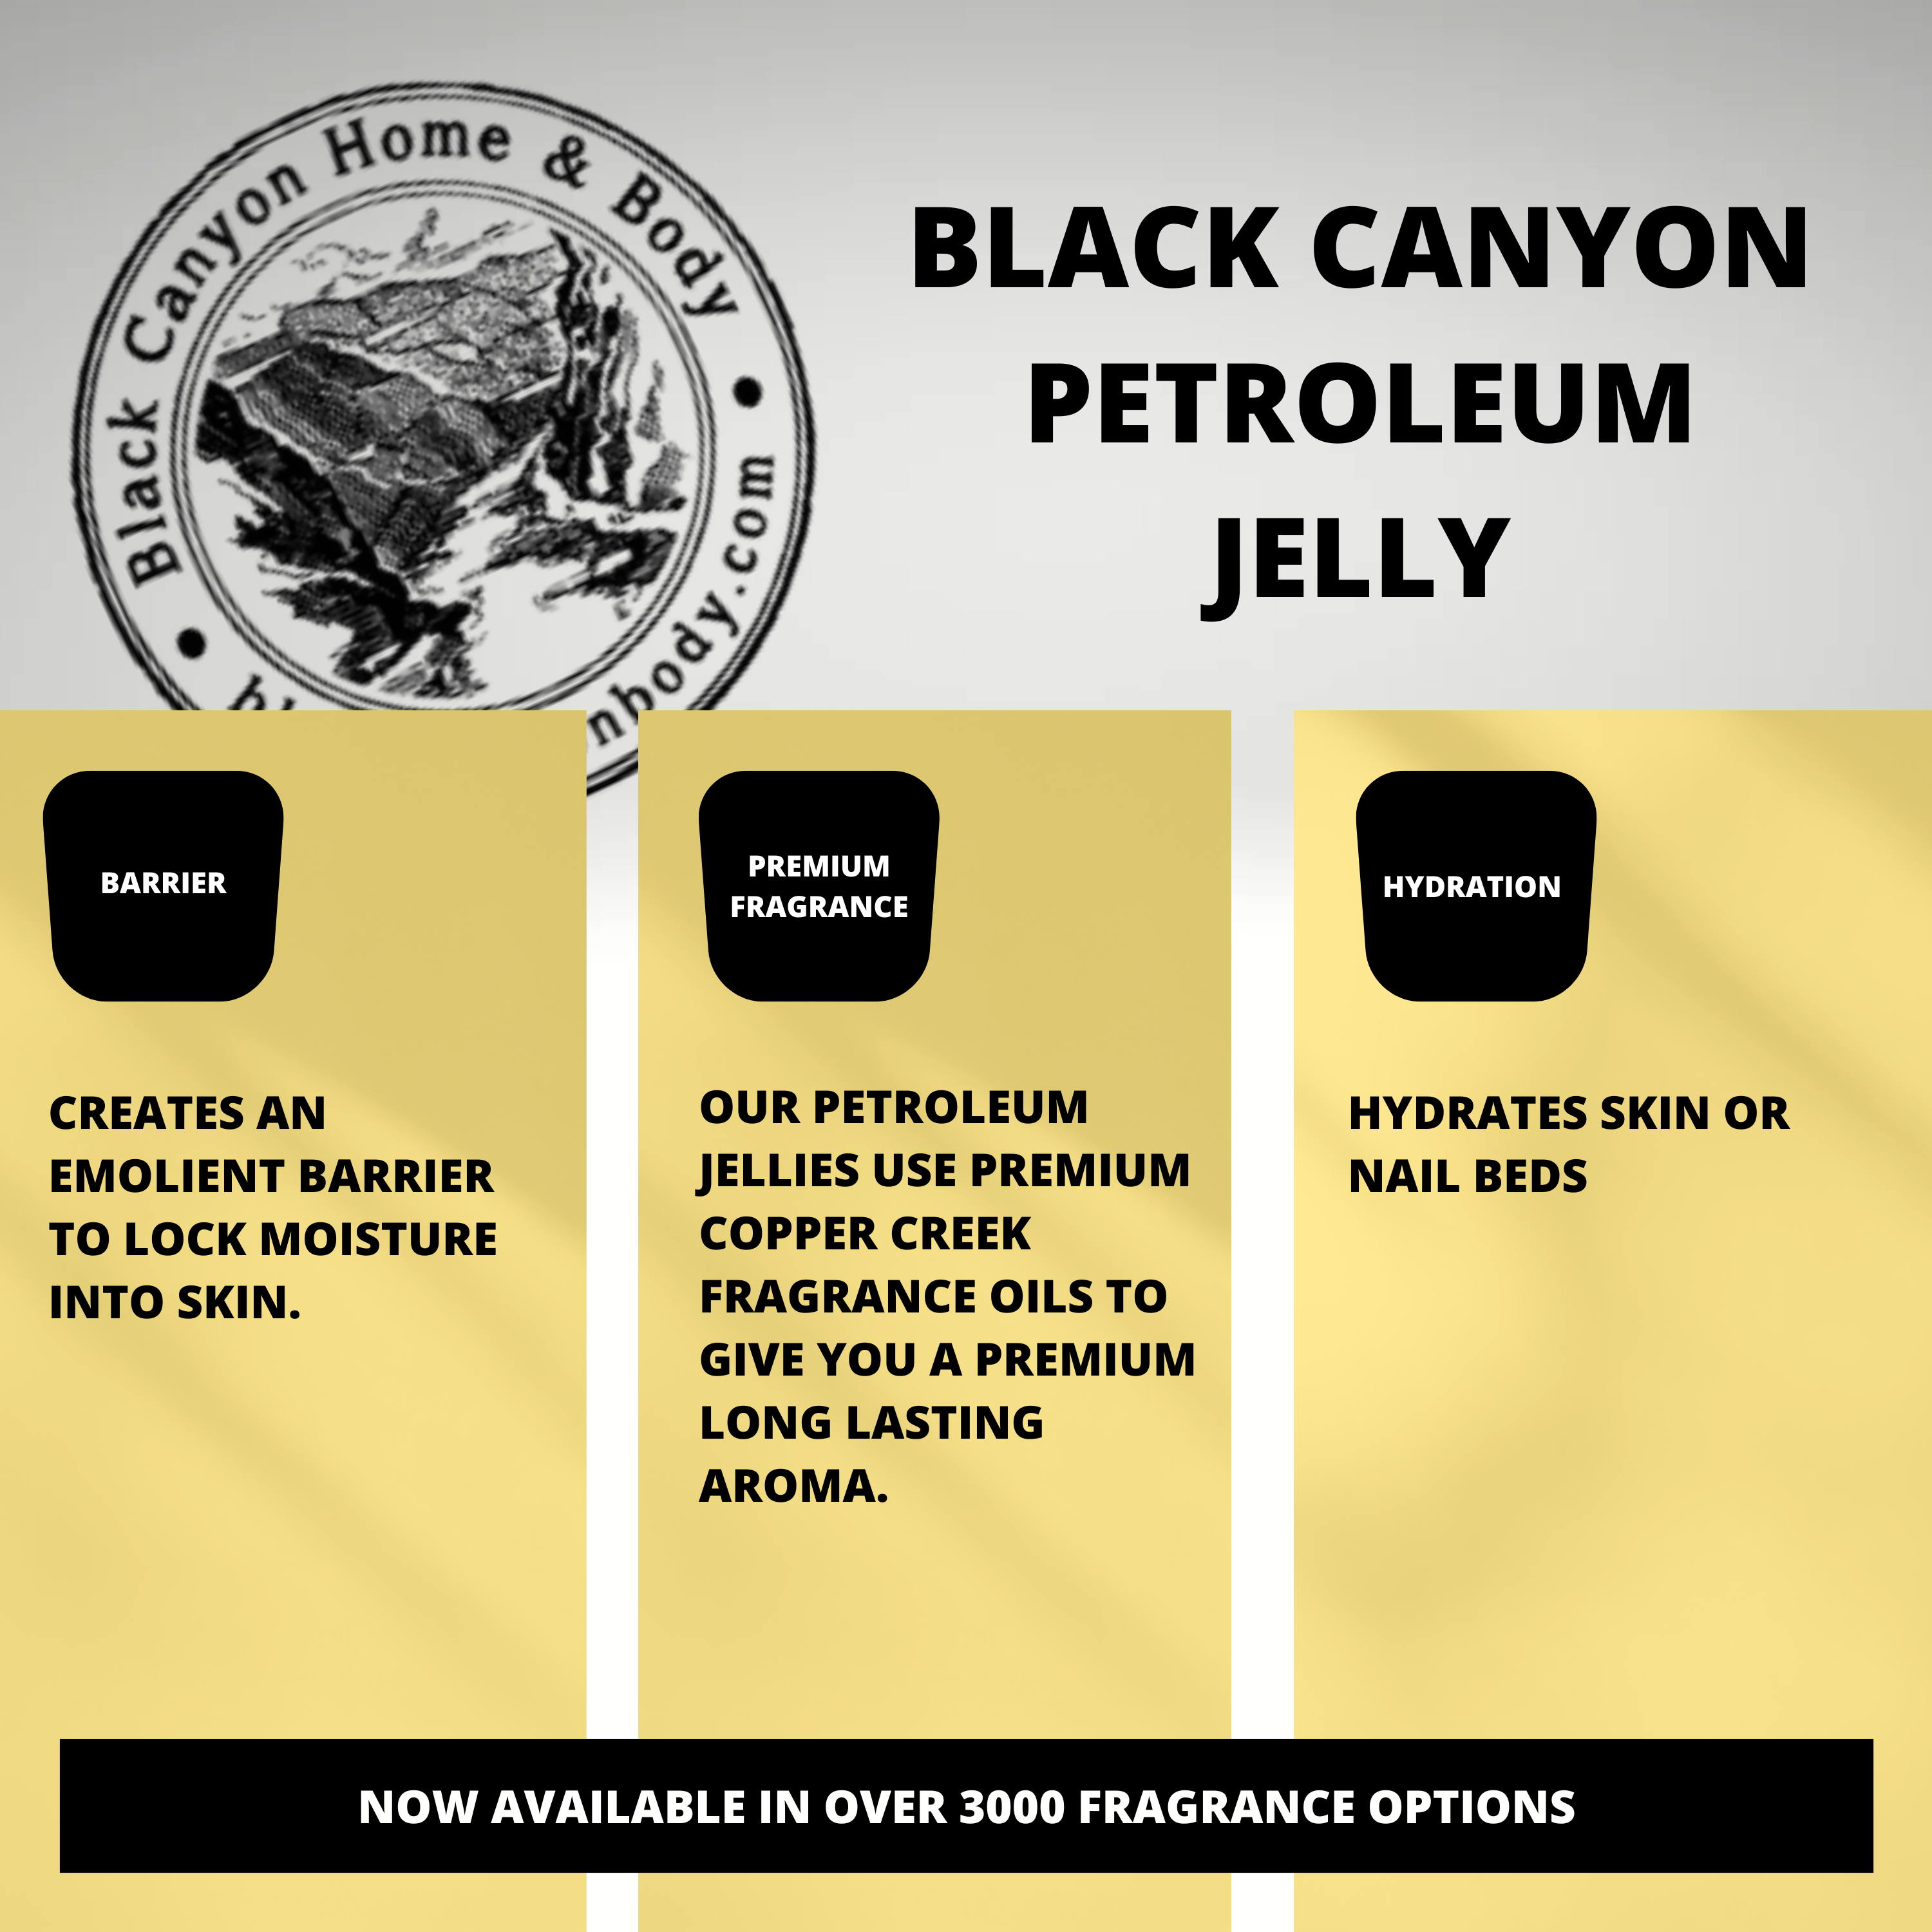 Black Canyon Green Apple & Pear Scented Petroleum Jelly